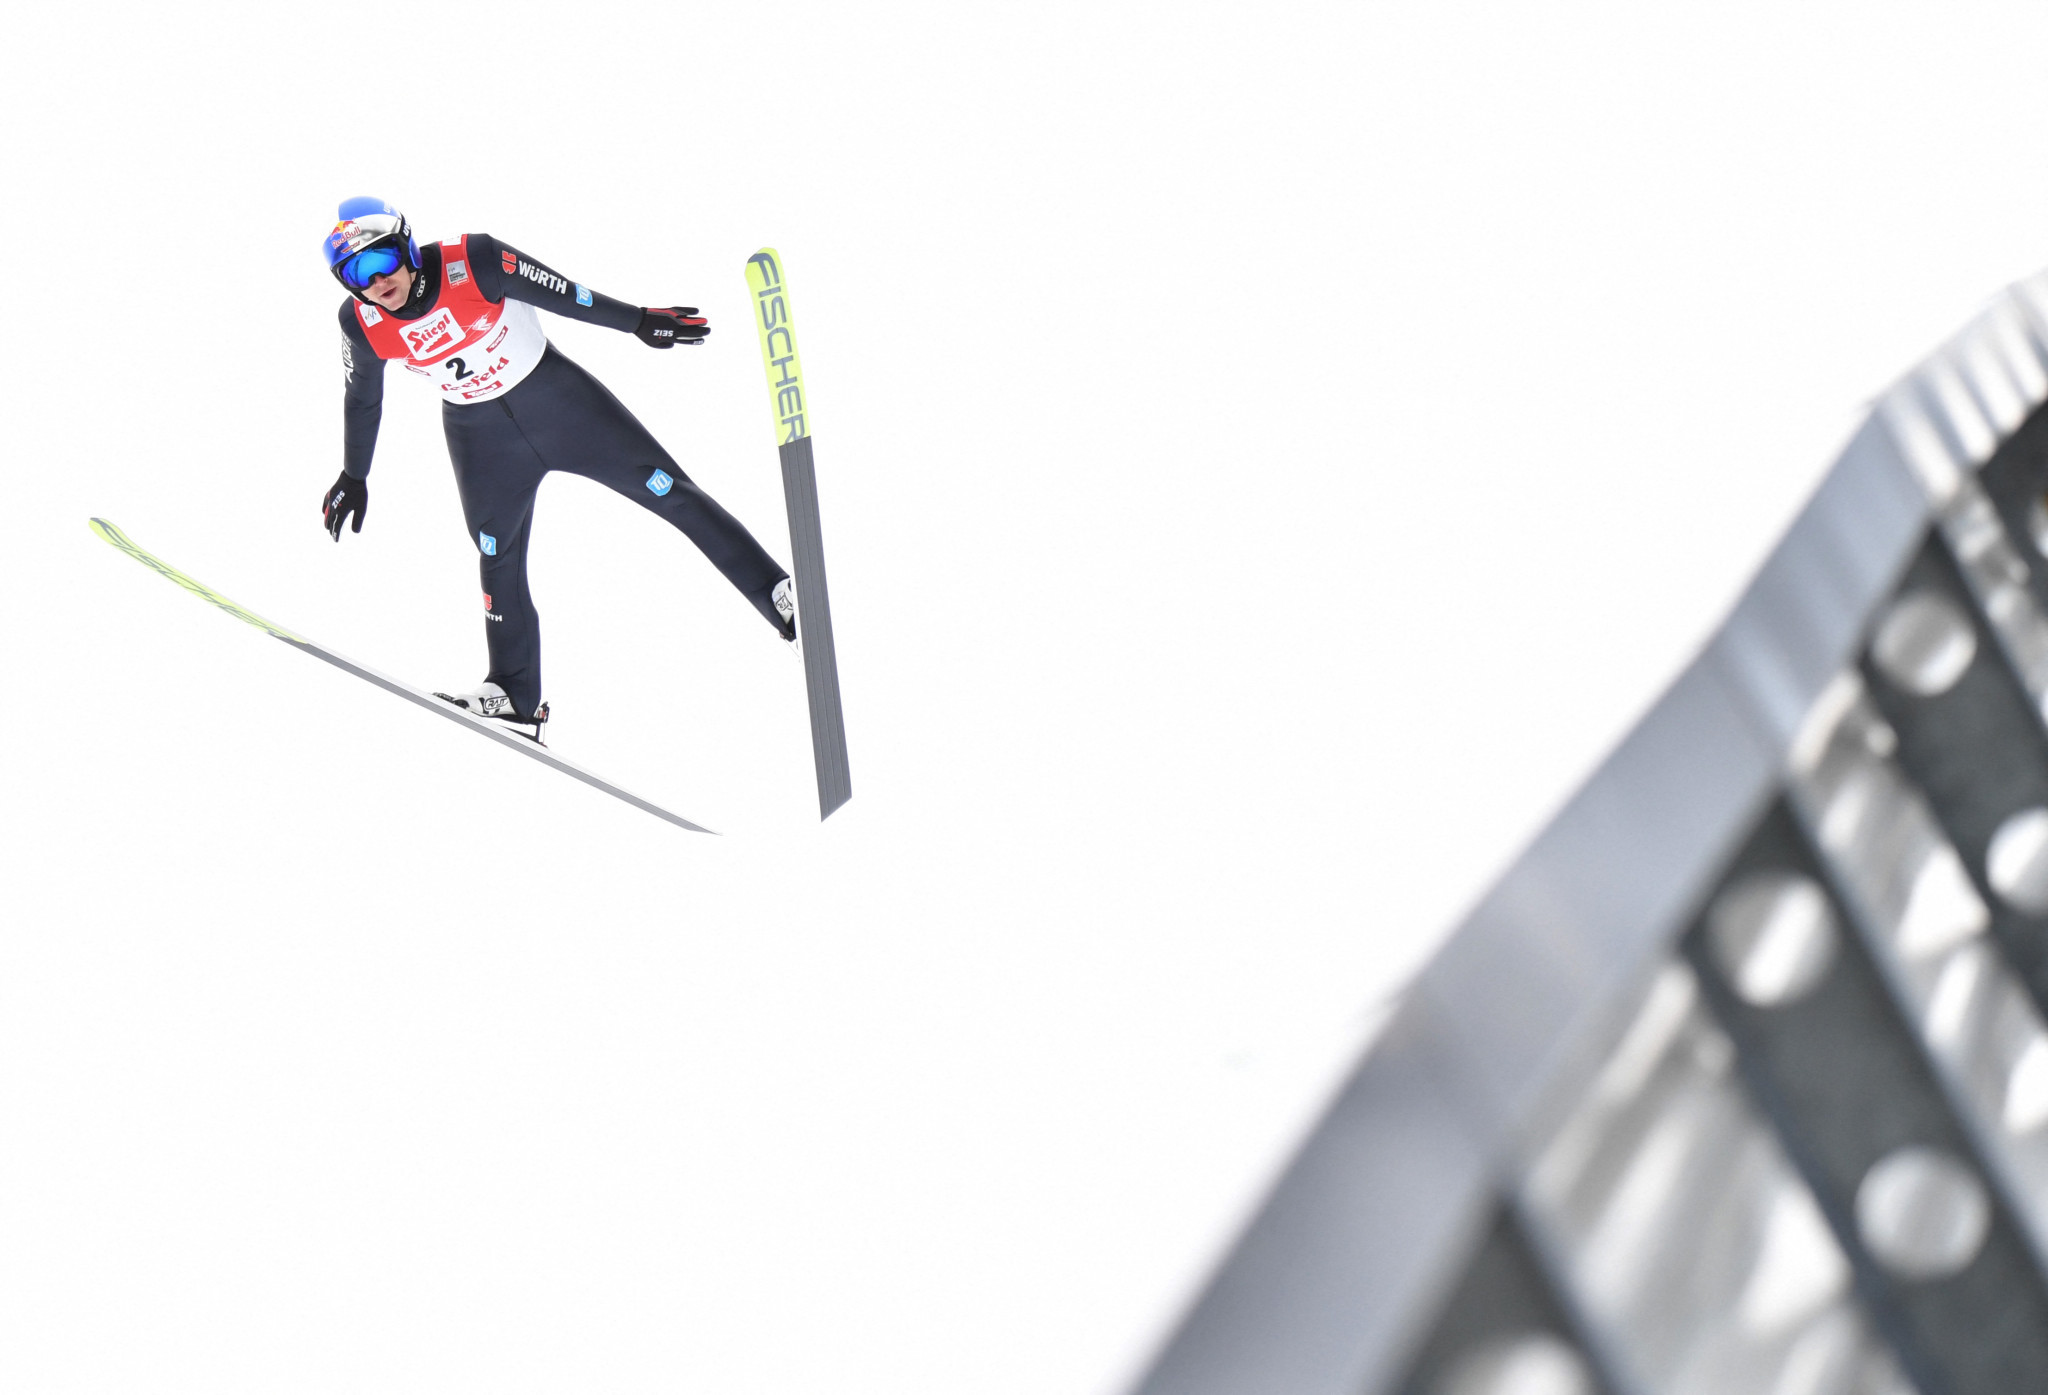 Vinzenz Geiger won gold on the second day of the Nordic Combined Triple ©Getty Images